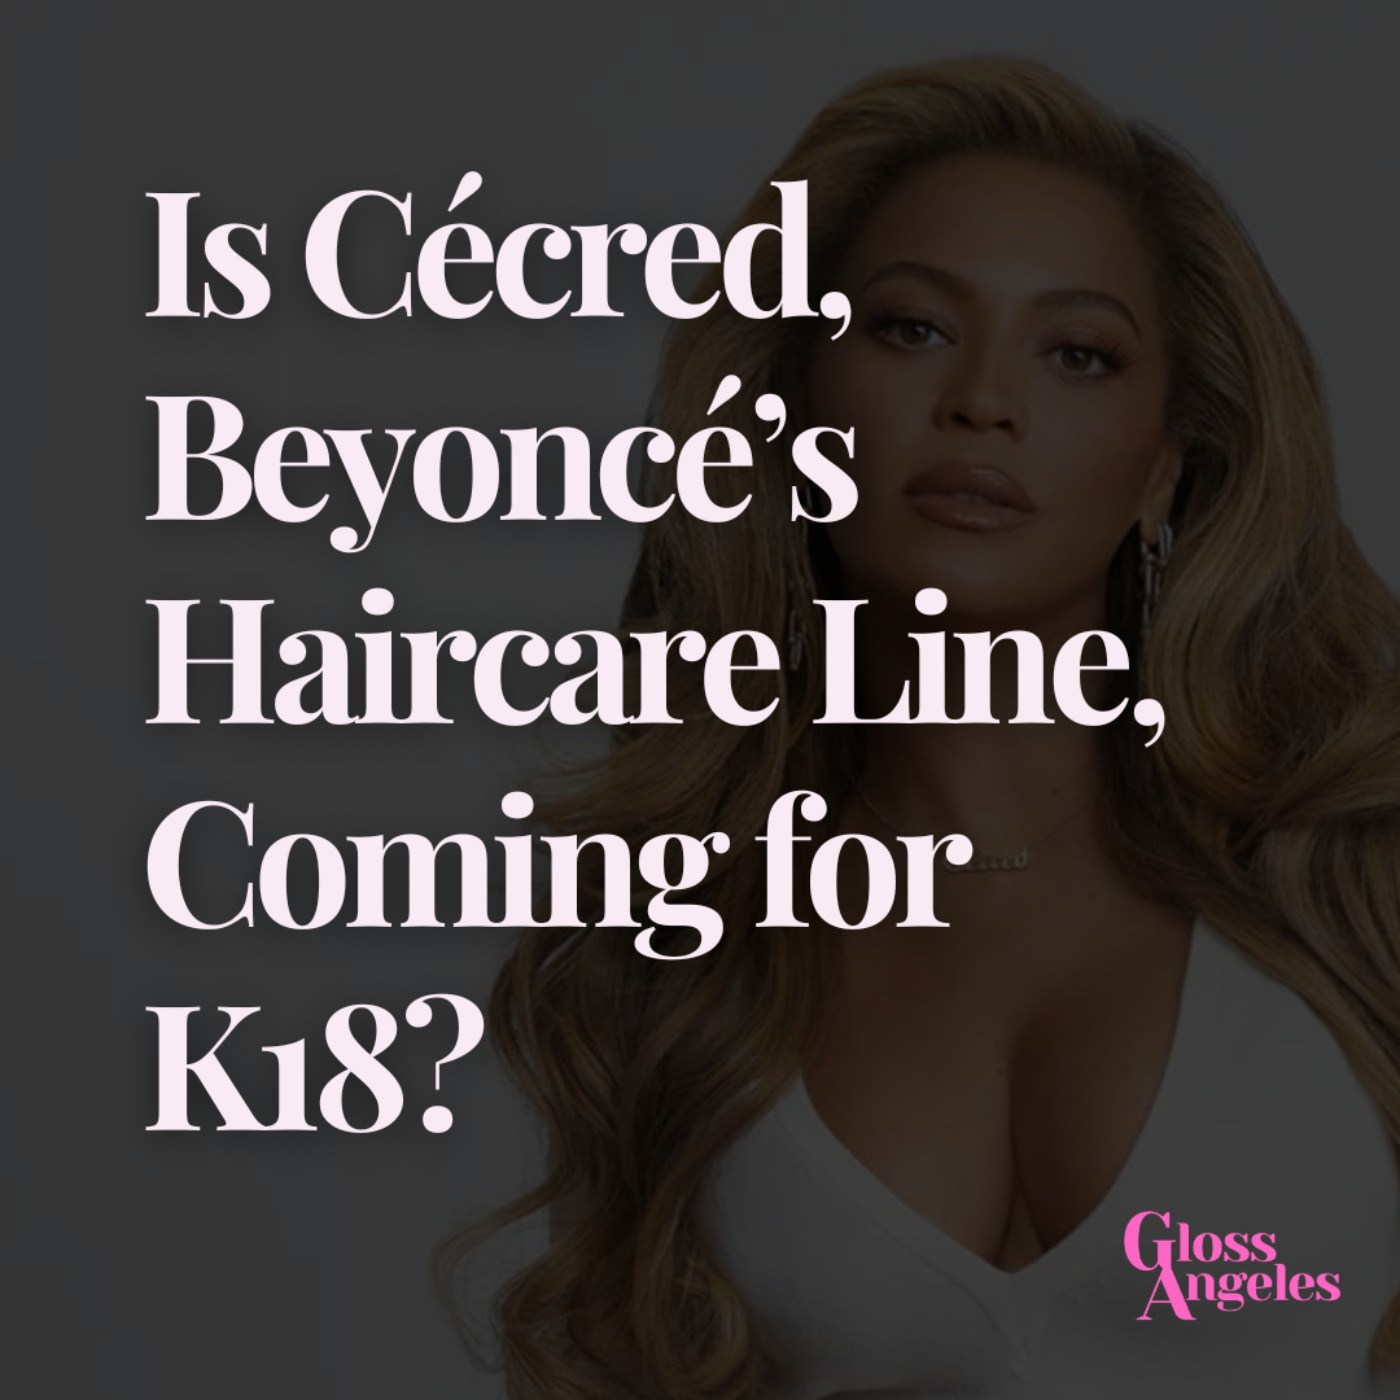 Is Beyoncé's Haircare Line Coming For K18?